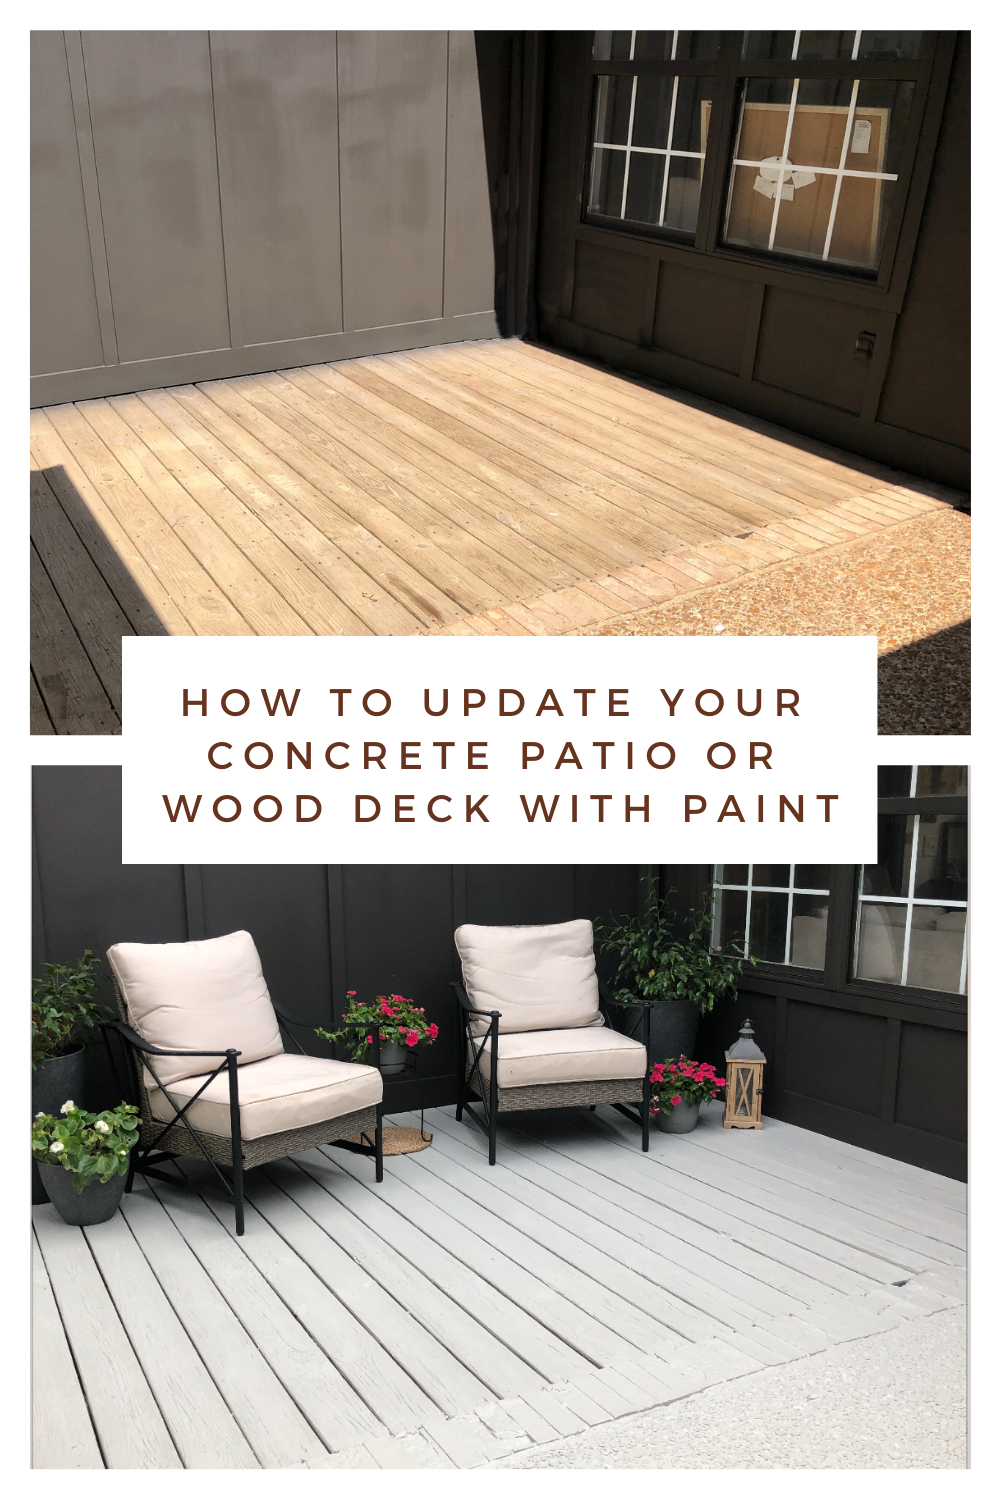 How to Update Your Concrete Patio or Wood Deck with Paint